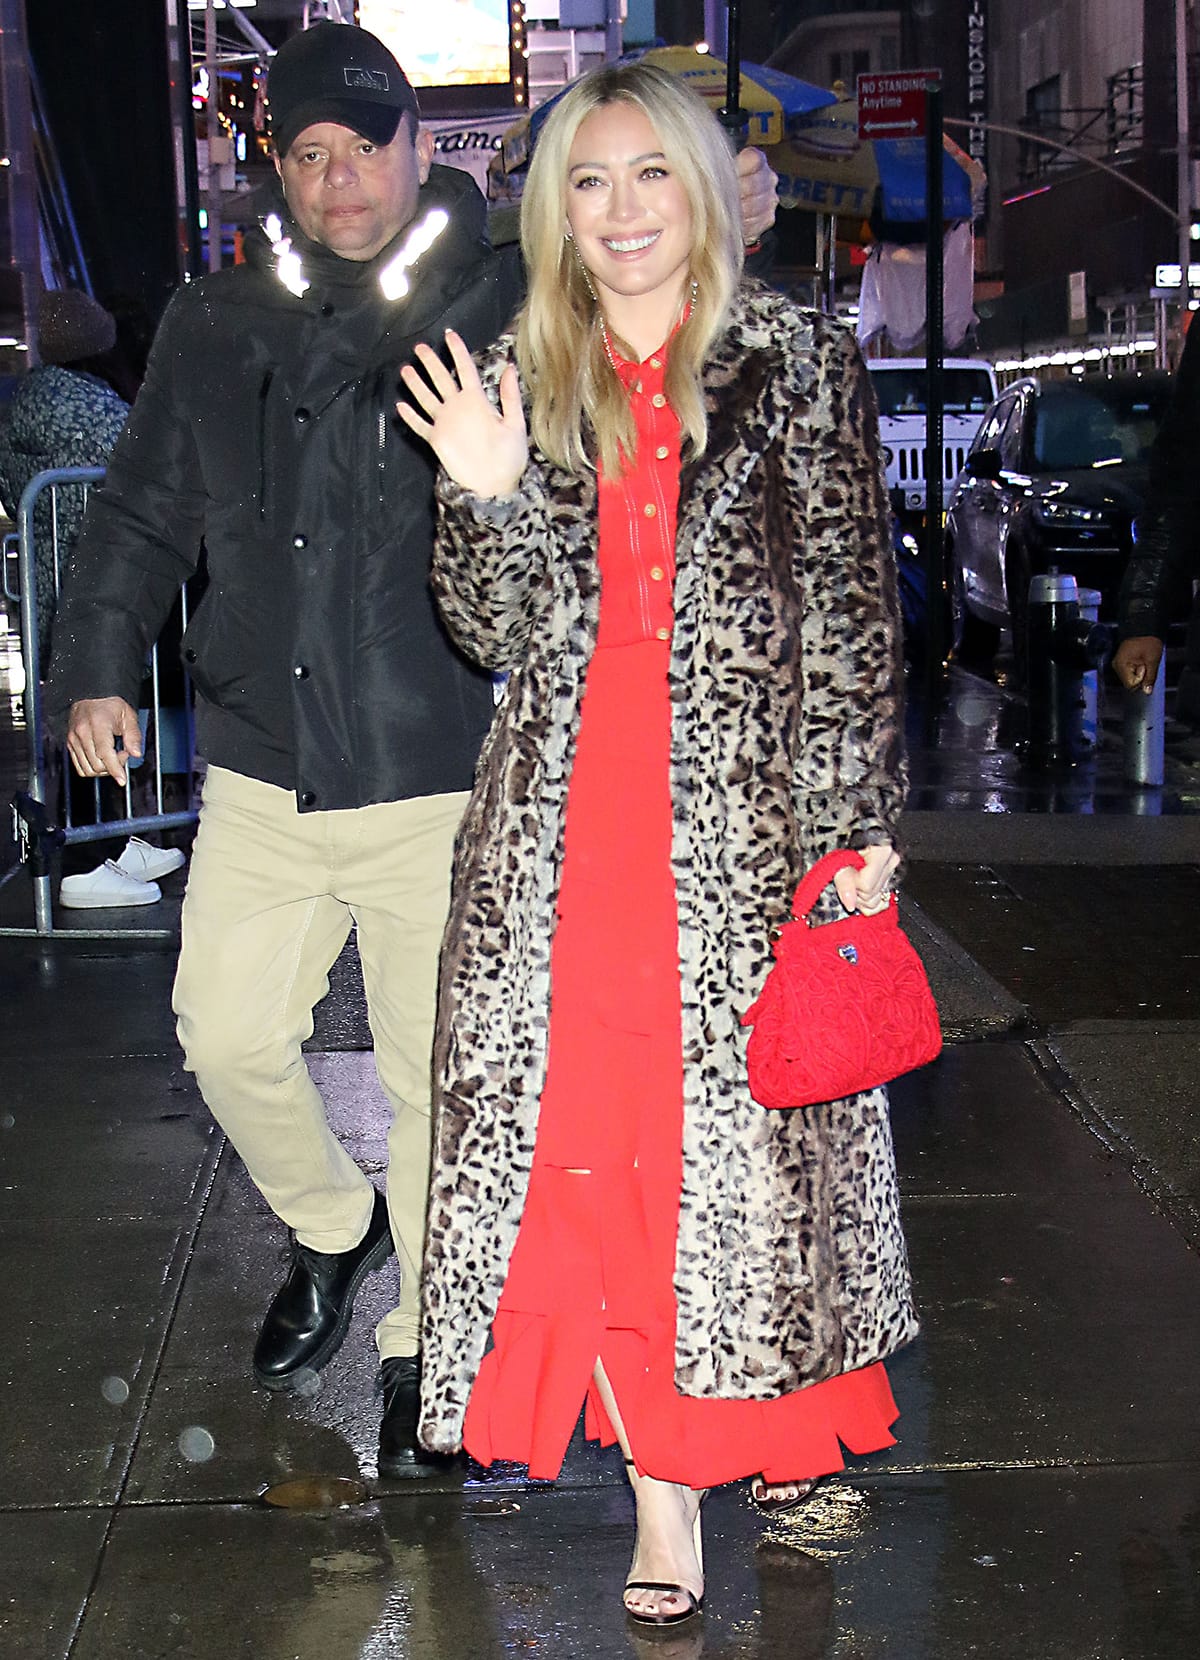 Hilary Duff bundles up in a leopard coat worn over her red dress